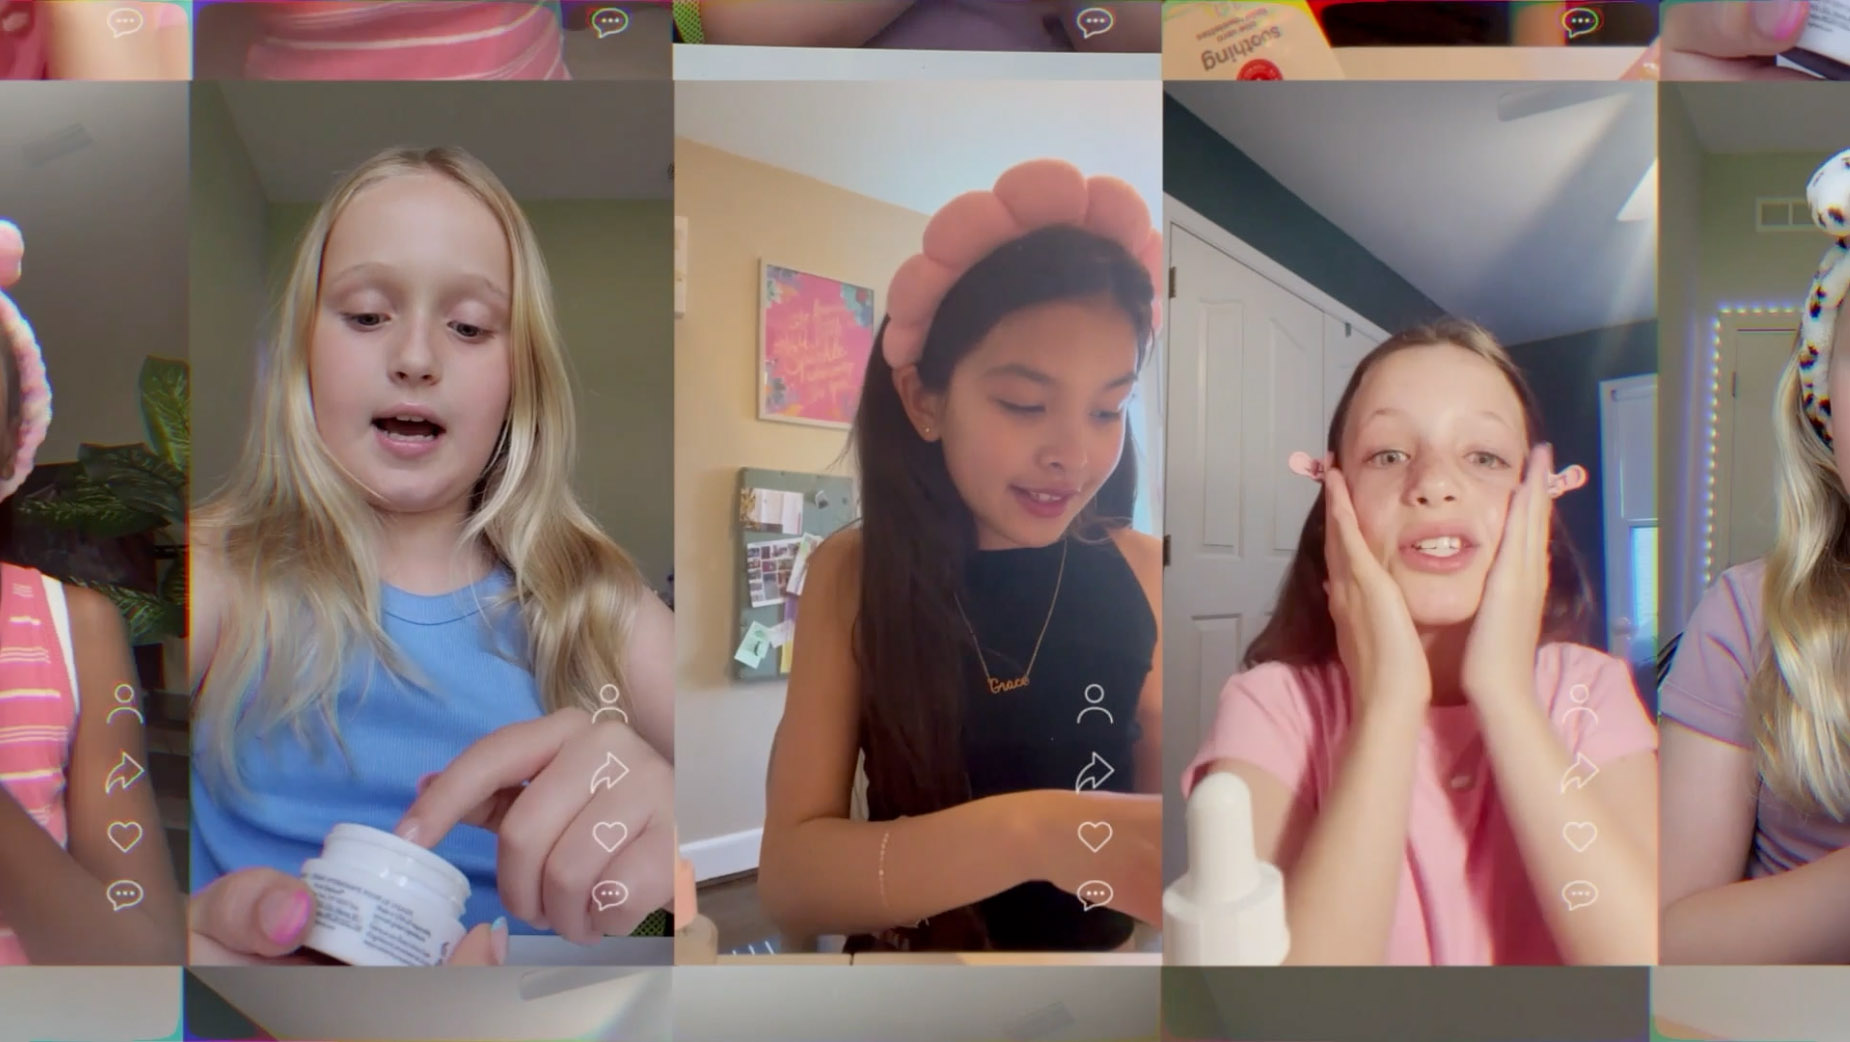 Three girls engaging in skincare routine using beauty products in a collage of video call screenshots.